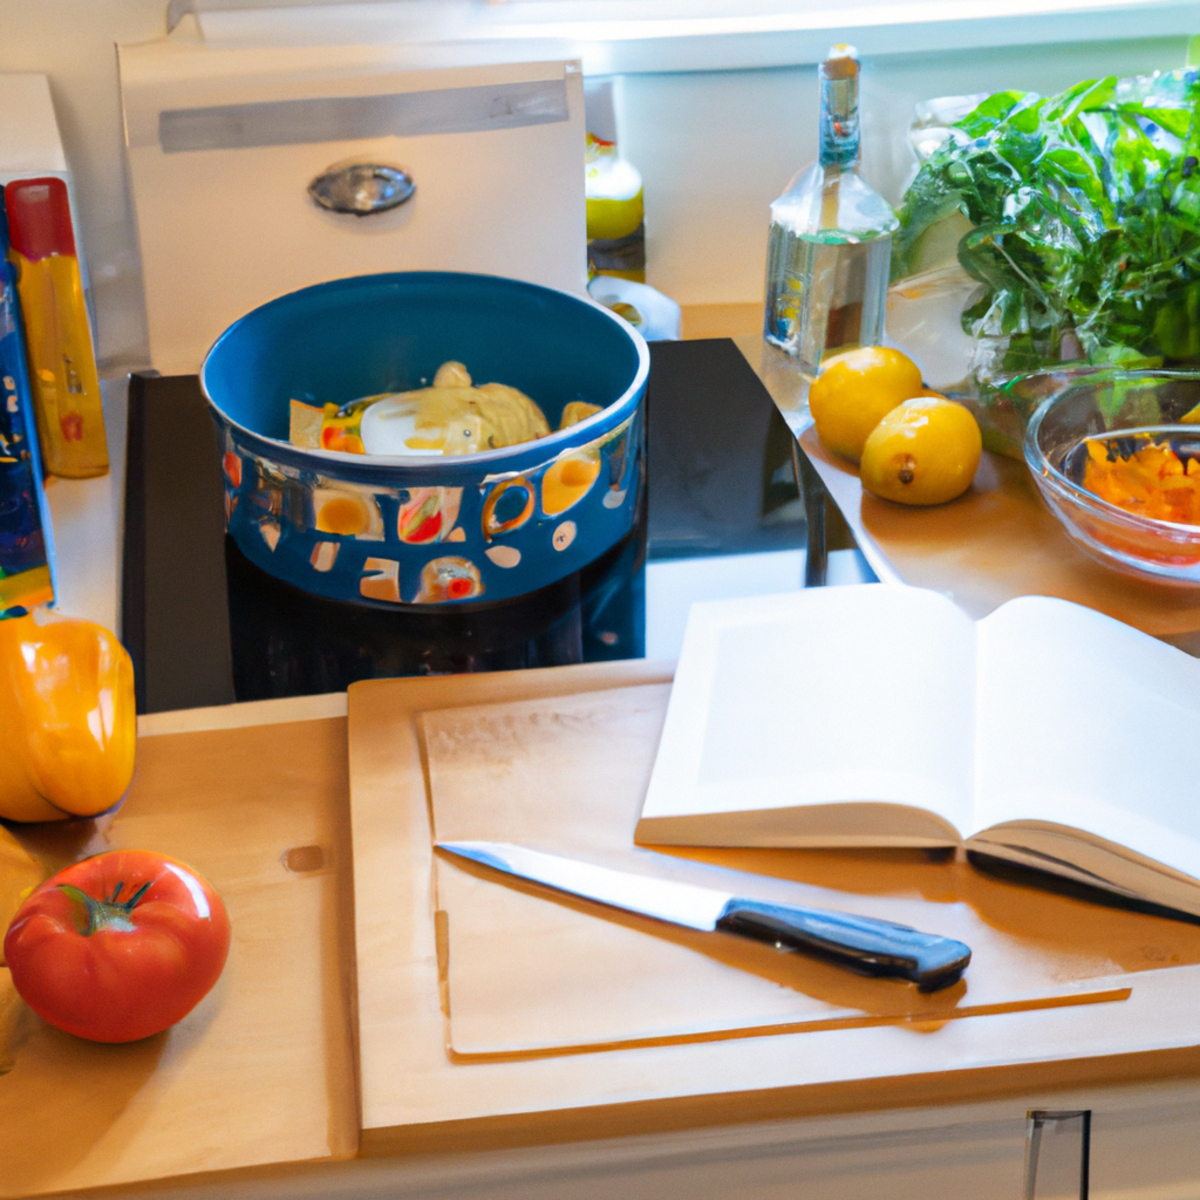 Well-organized kitchen countertop with cooking utensils, ingredients, chopped vegetables, simmering pot, open cookbook, and timer-Congenital Insensitivity to Pain with Anhidrosis (CIPA)